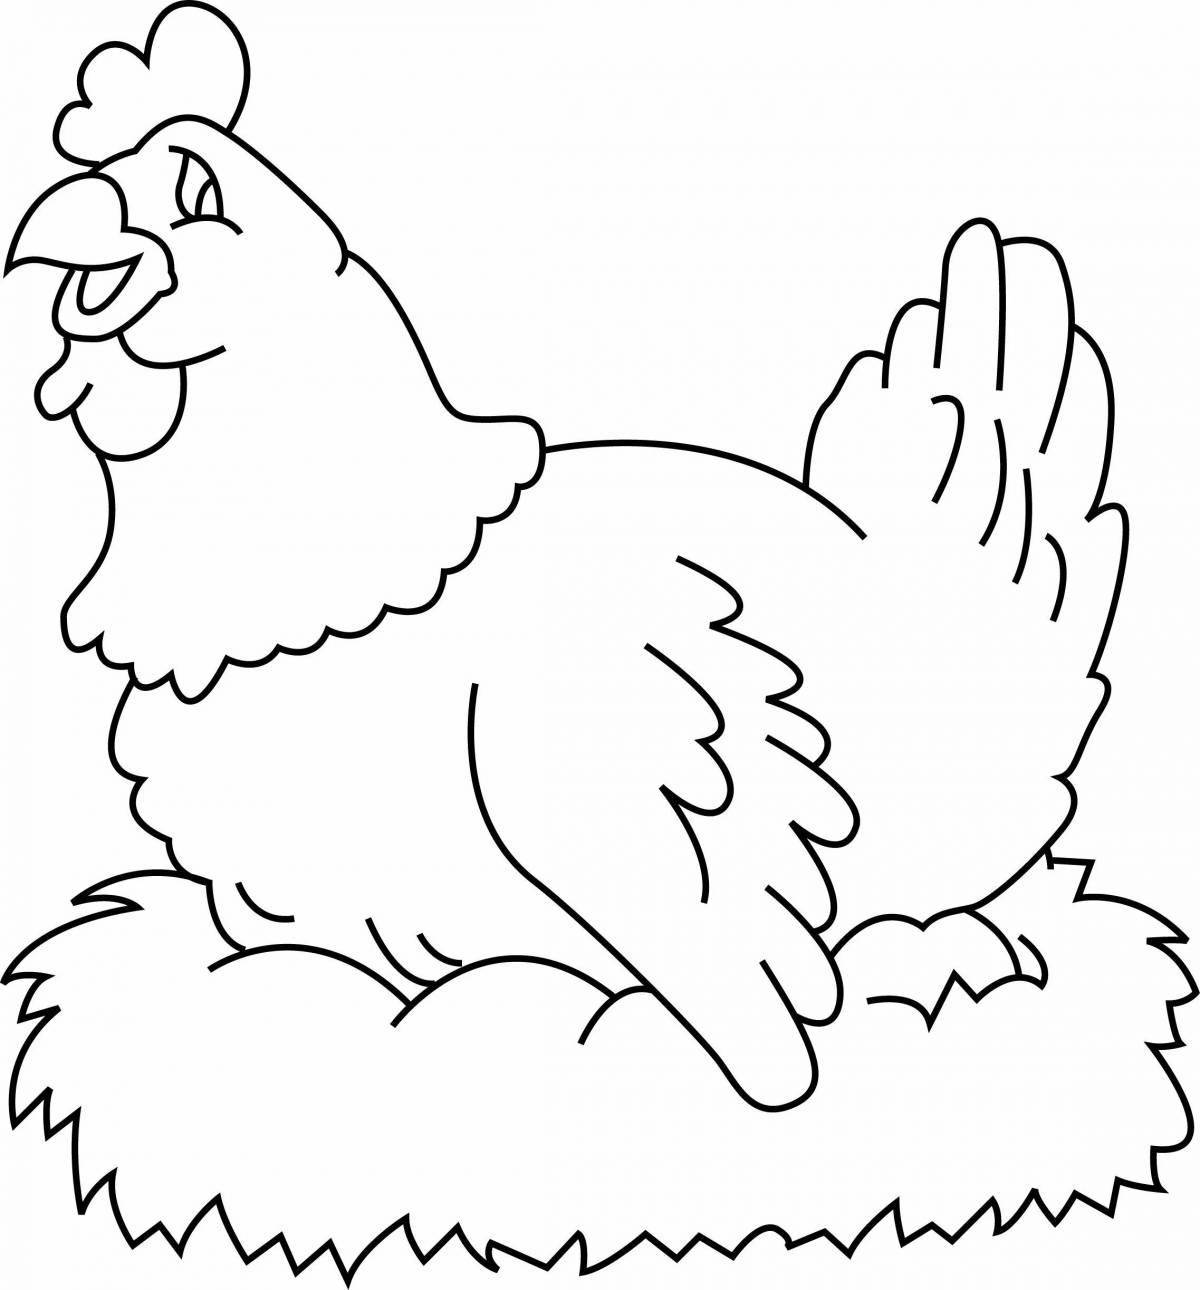 Chicken coloring page for kids 2-3 years old